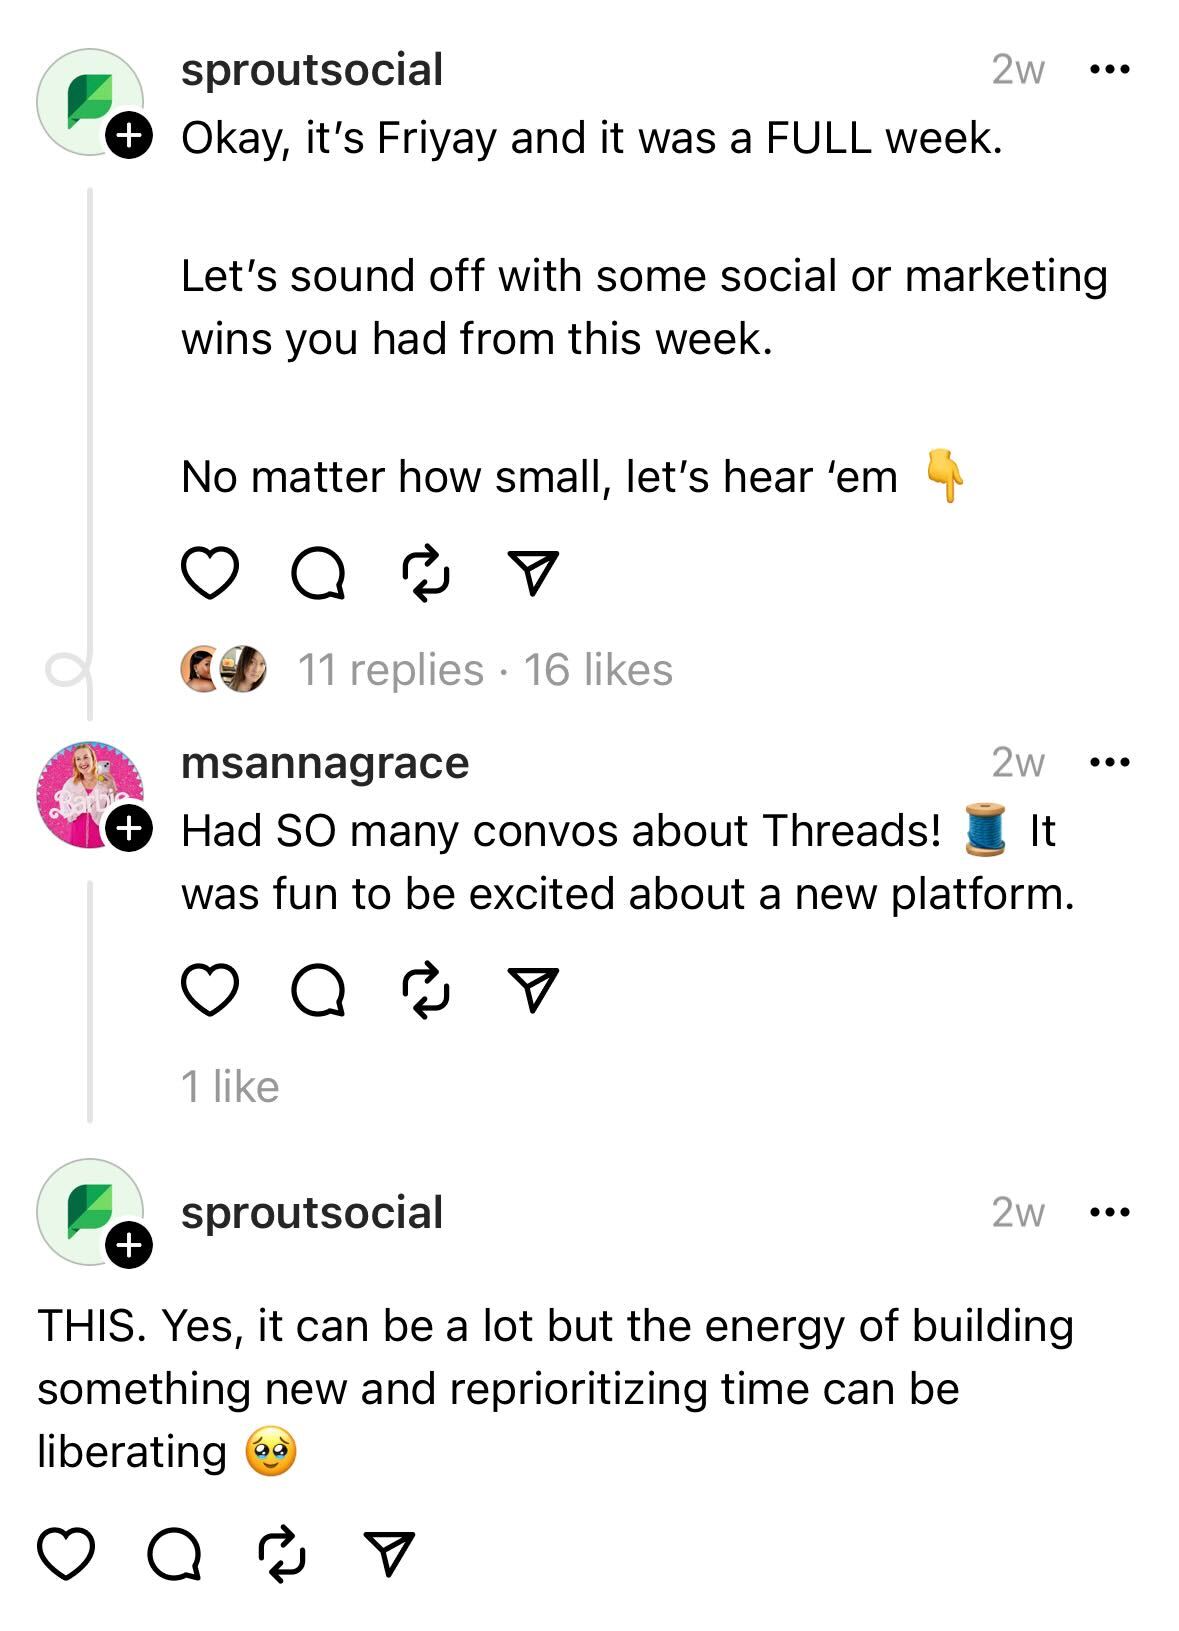 A screenshot of an interaction between the Sprout Social Threads account and Threads user @MsAnnaGrace. The initial message from Sprout says, “Okay, it’s Fri-yay and it was a FULL week. Let’s sound off with some social or marketing wins you had from this week. Now matter how small, let’s hear ‘em.” @MsAnnaGrace responds with, “Had SO many convos about Threads! It was so fun to be excited about a new platform.” Sprout replies, “THIS. Yes, it can be a lot but the energy of building something new and reprioritizing time can be so liberating.”